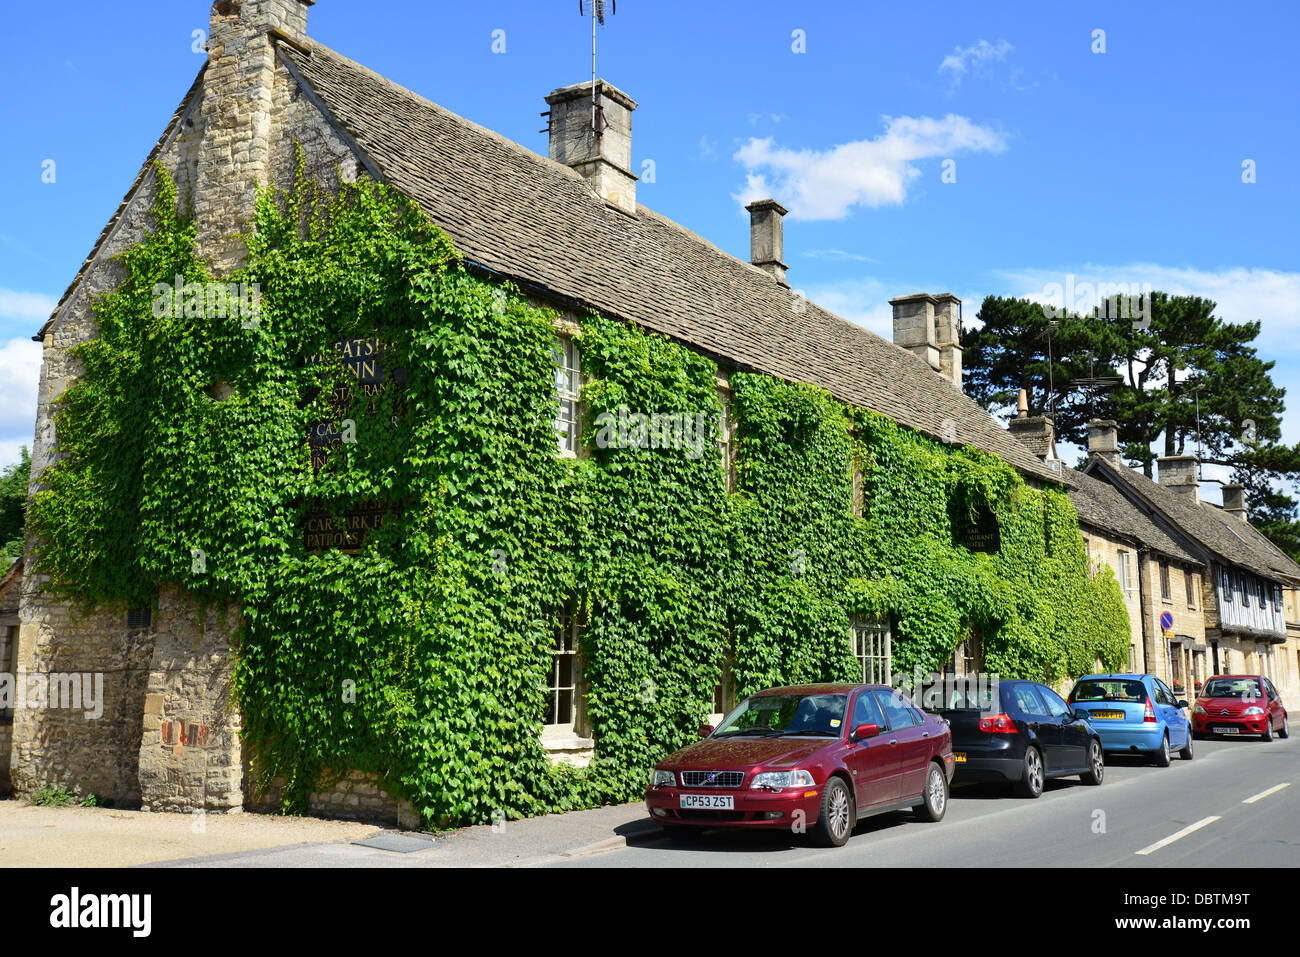 Le Wheatsheaf Inn, West End, Northleach, Cotswolds, Gloucestershire, Angleterre, Royaume-Uni Banque D'Images